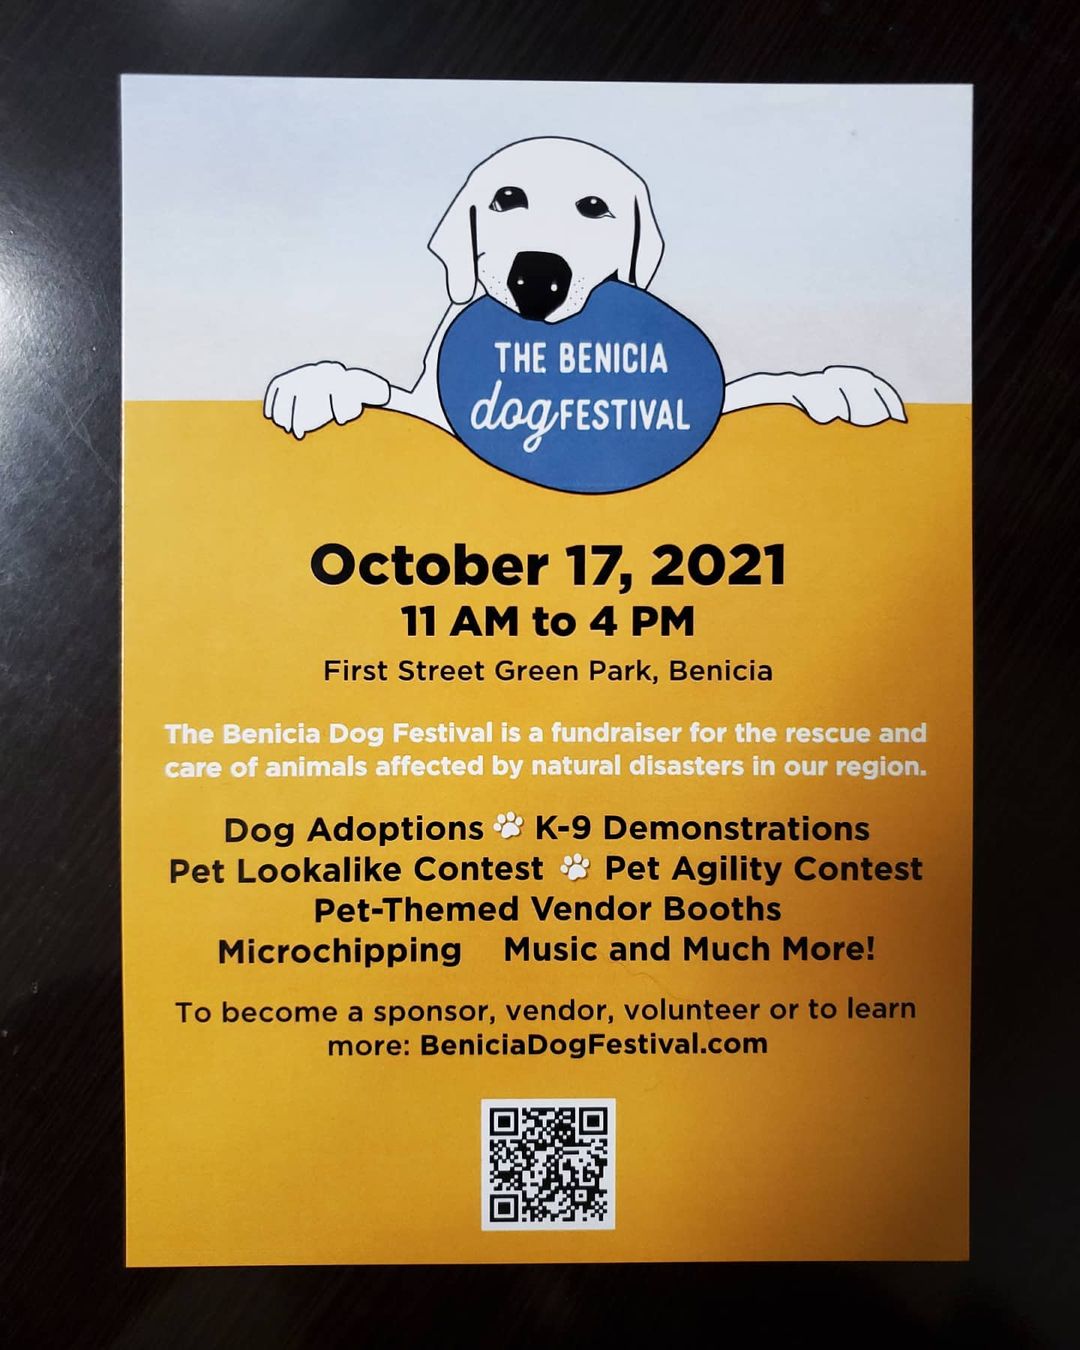 Doggie fun day on October 17th and we want to see you there!! 

@nexgenk9 is a HUGE sponsor and they are hosting a super exciting My Dog and Me Obstacle Course with PRIZES 🏆 

@beniciadogfest 📅 
@nexgenk9 🐶